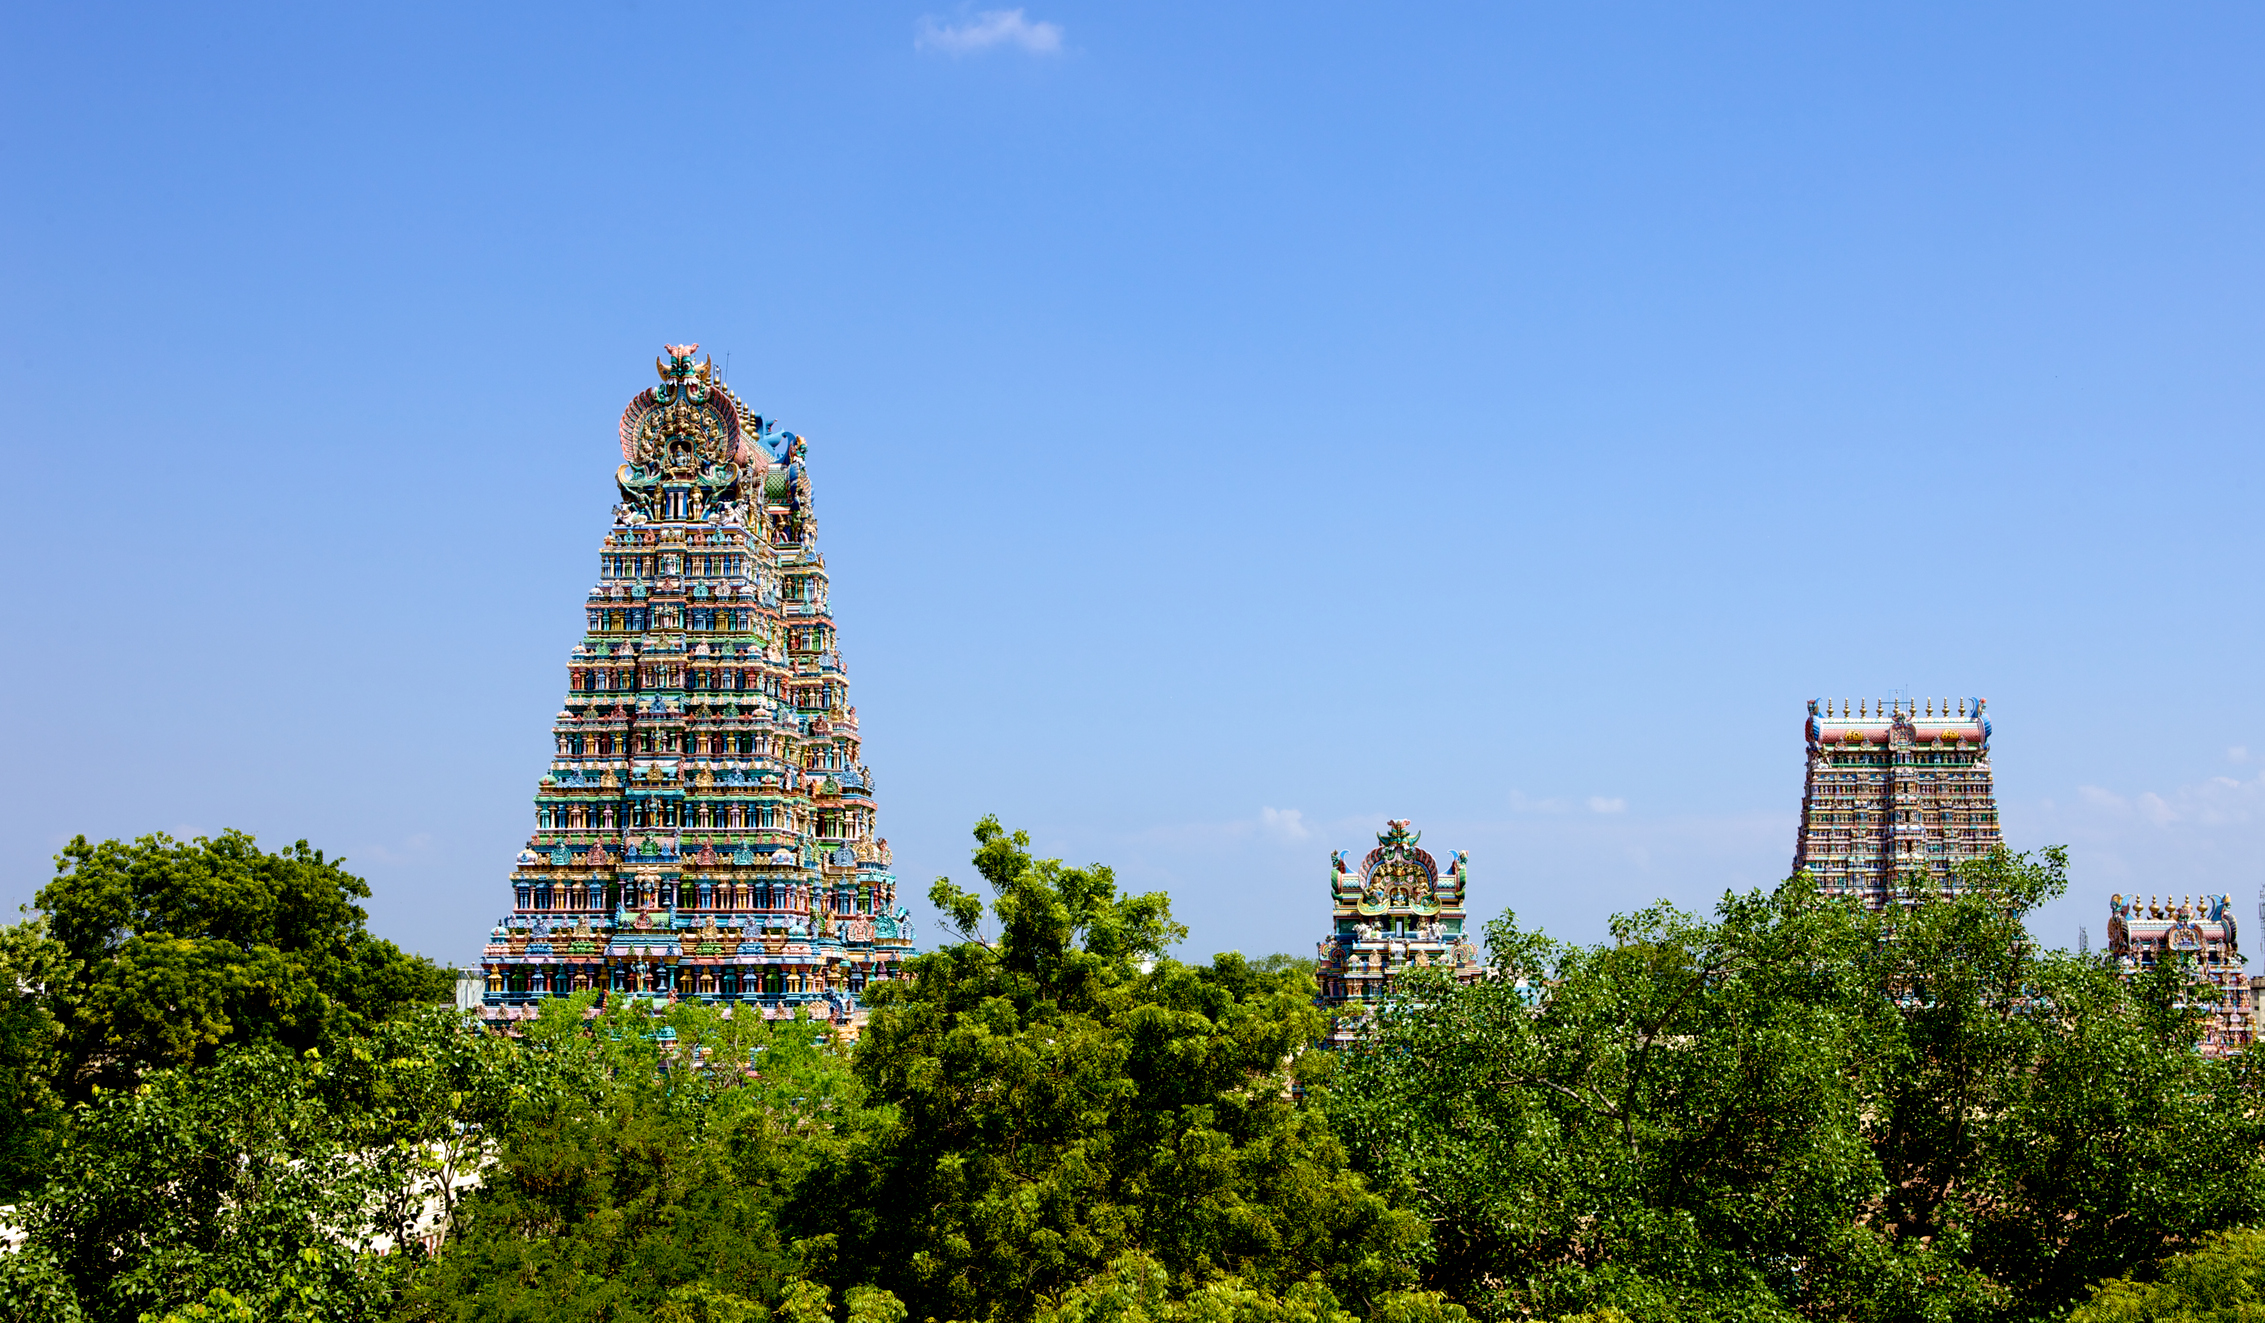 Witness extraordinary Indian architecture like this towering Hindu temple in Madurai when you take a tailor-made holiday with Alfred&.